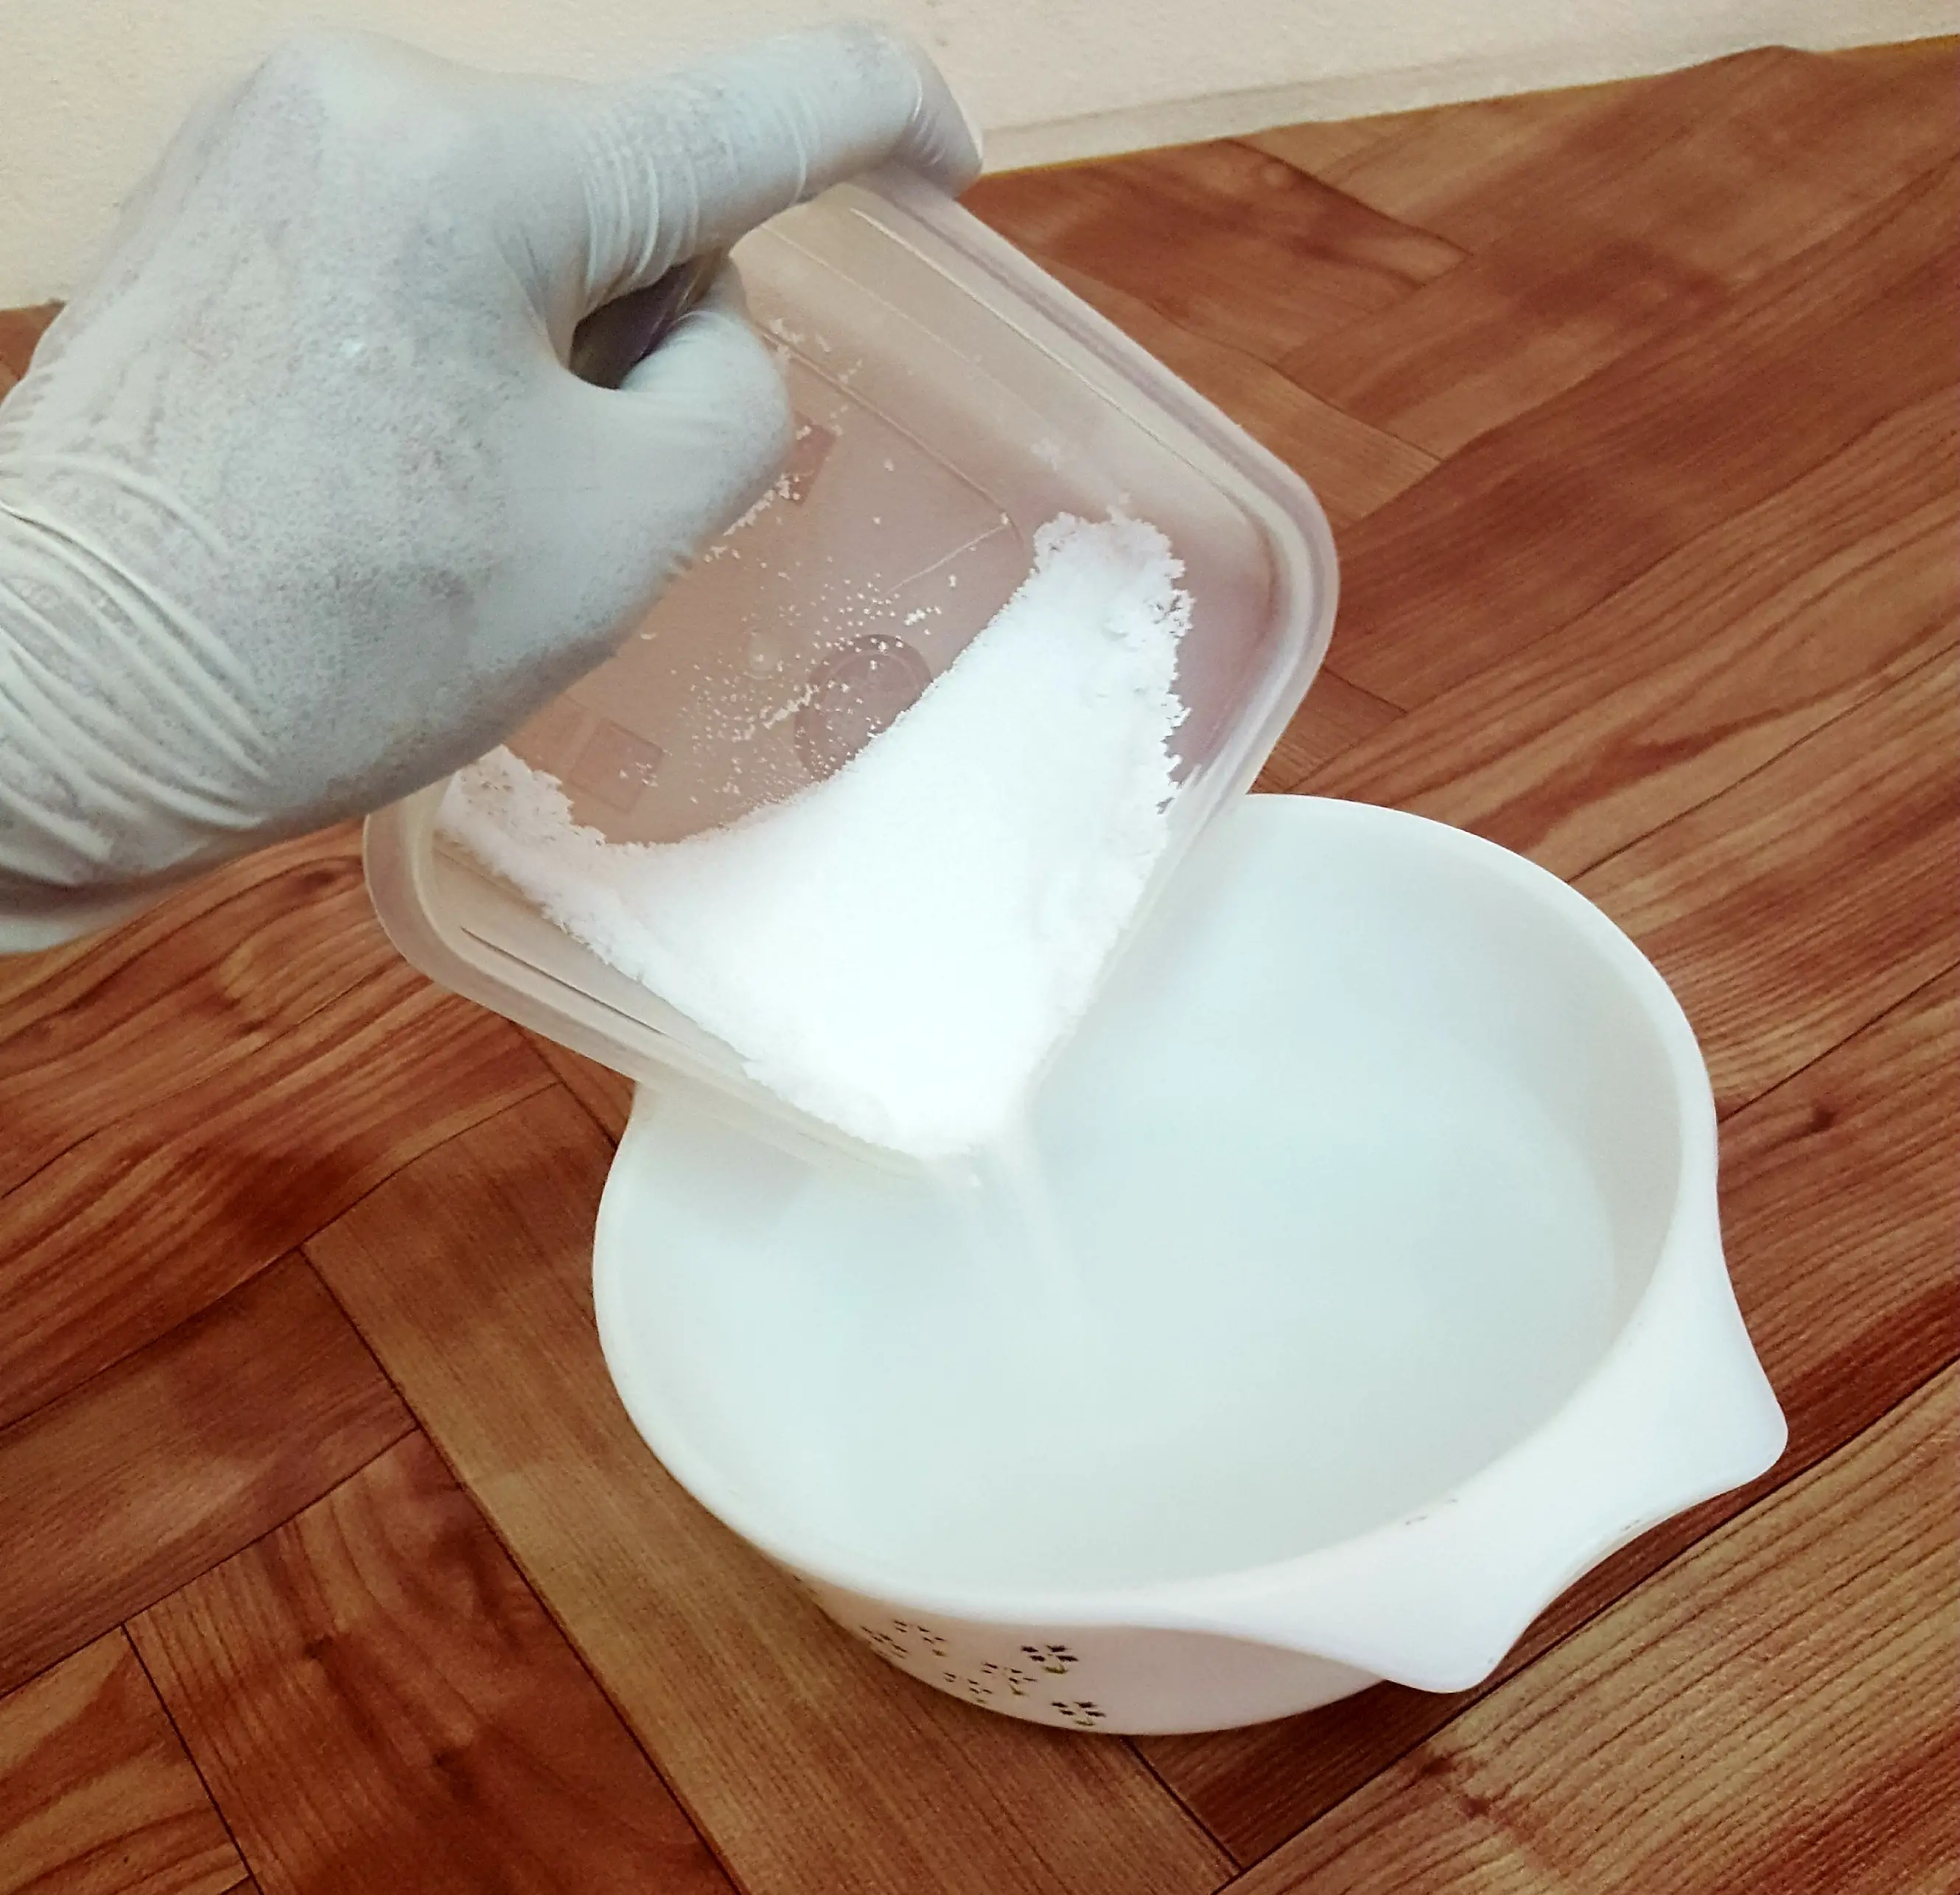 How to Make Soap